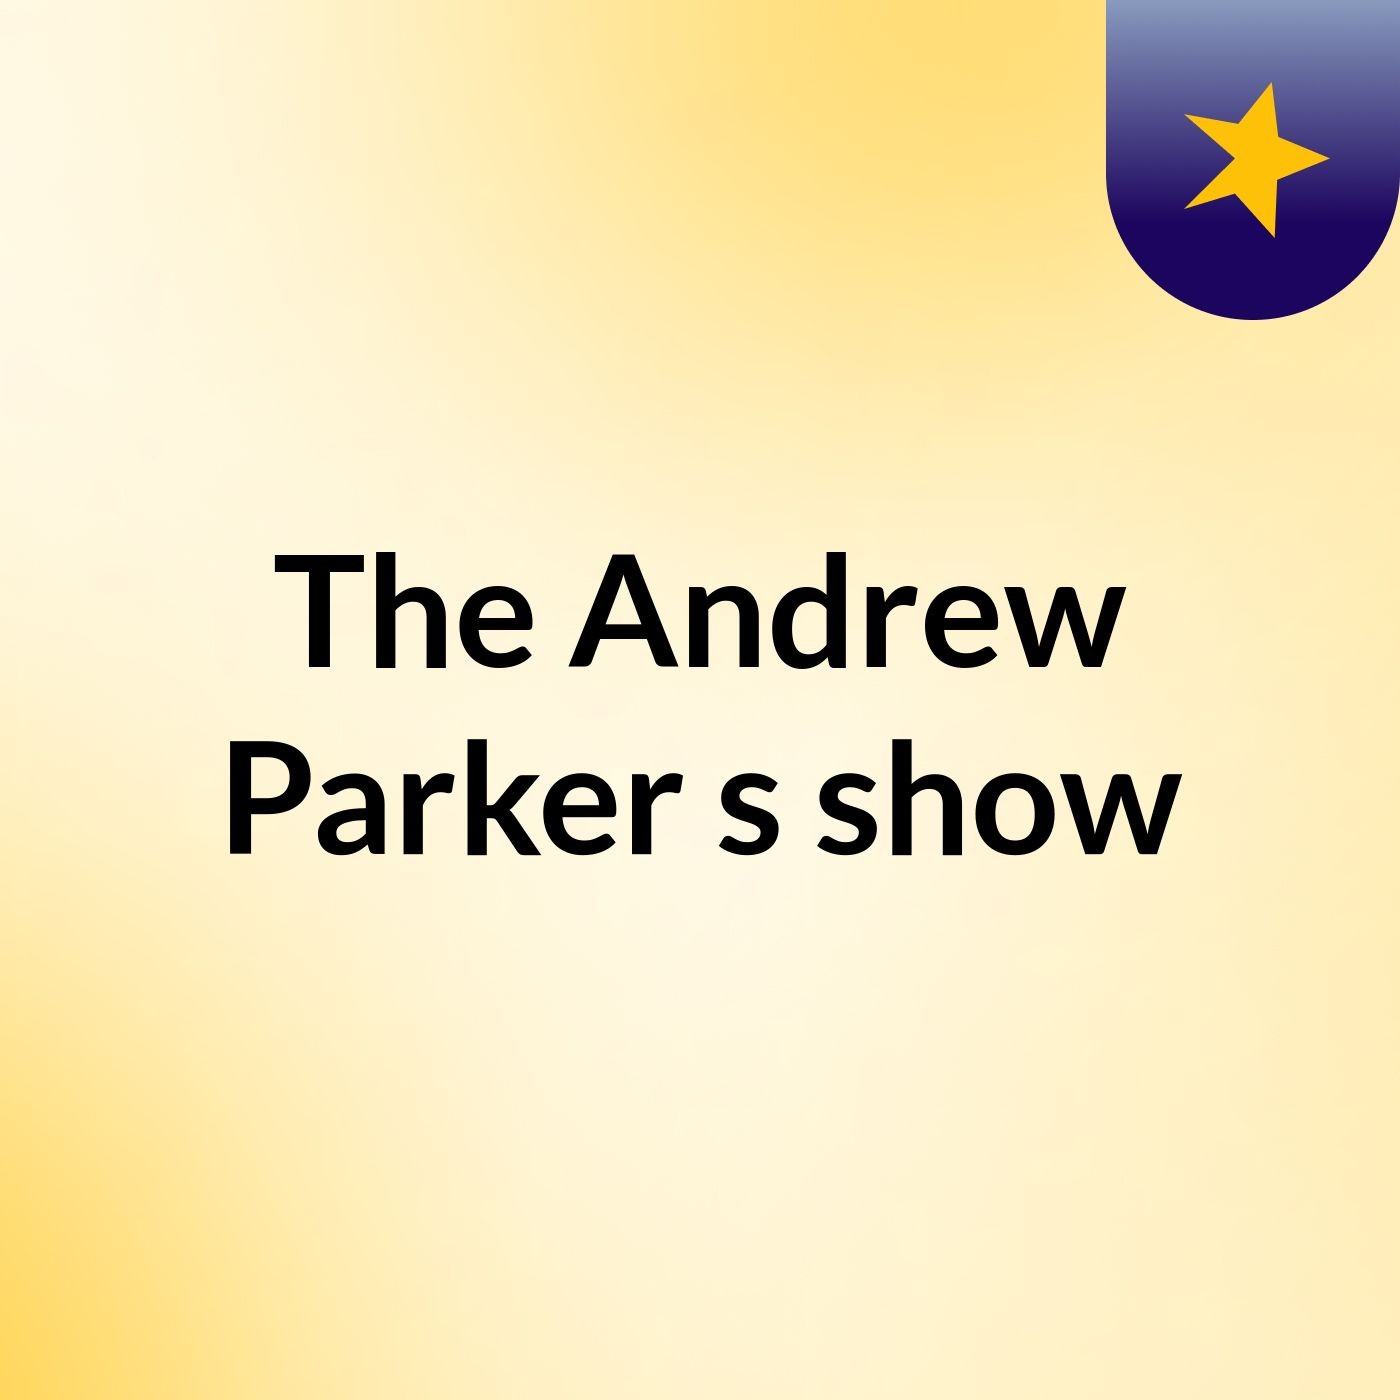 The Andrew Parker's show